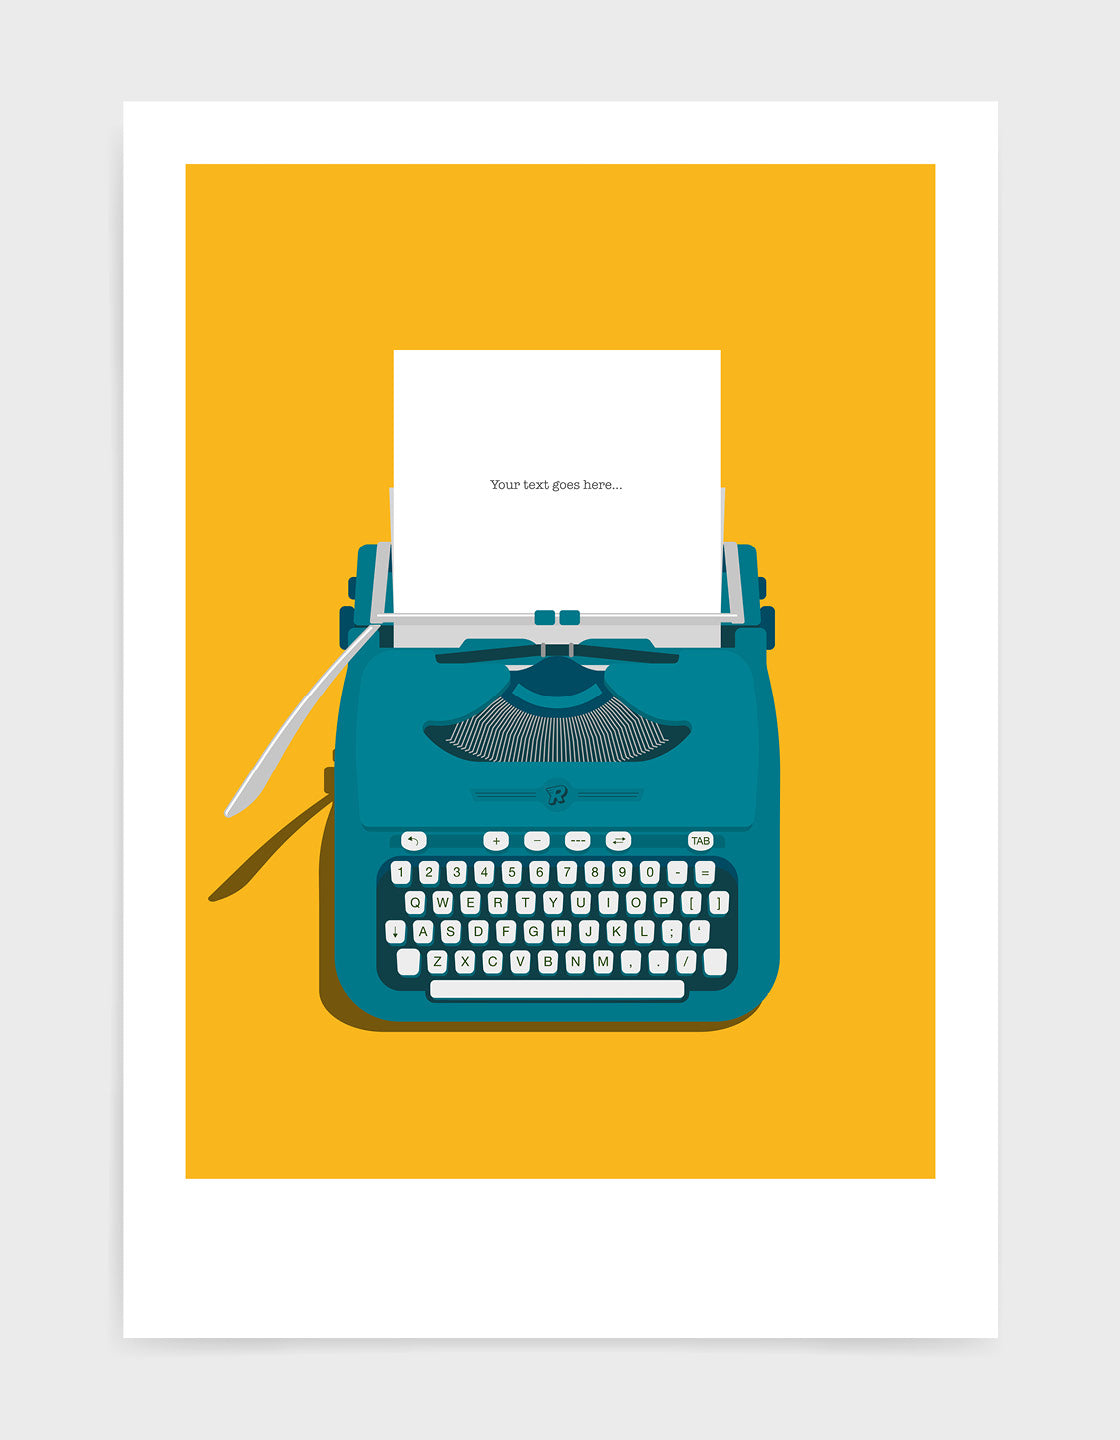 Art print showing a retro vintage typewriter in teal with paper in the top and space to personalise the text. Set against a bright yellow background